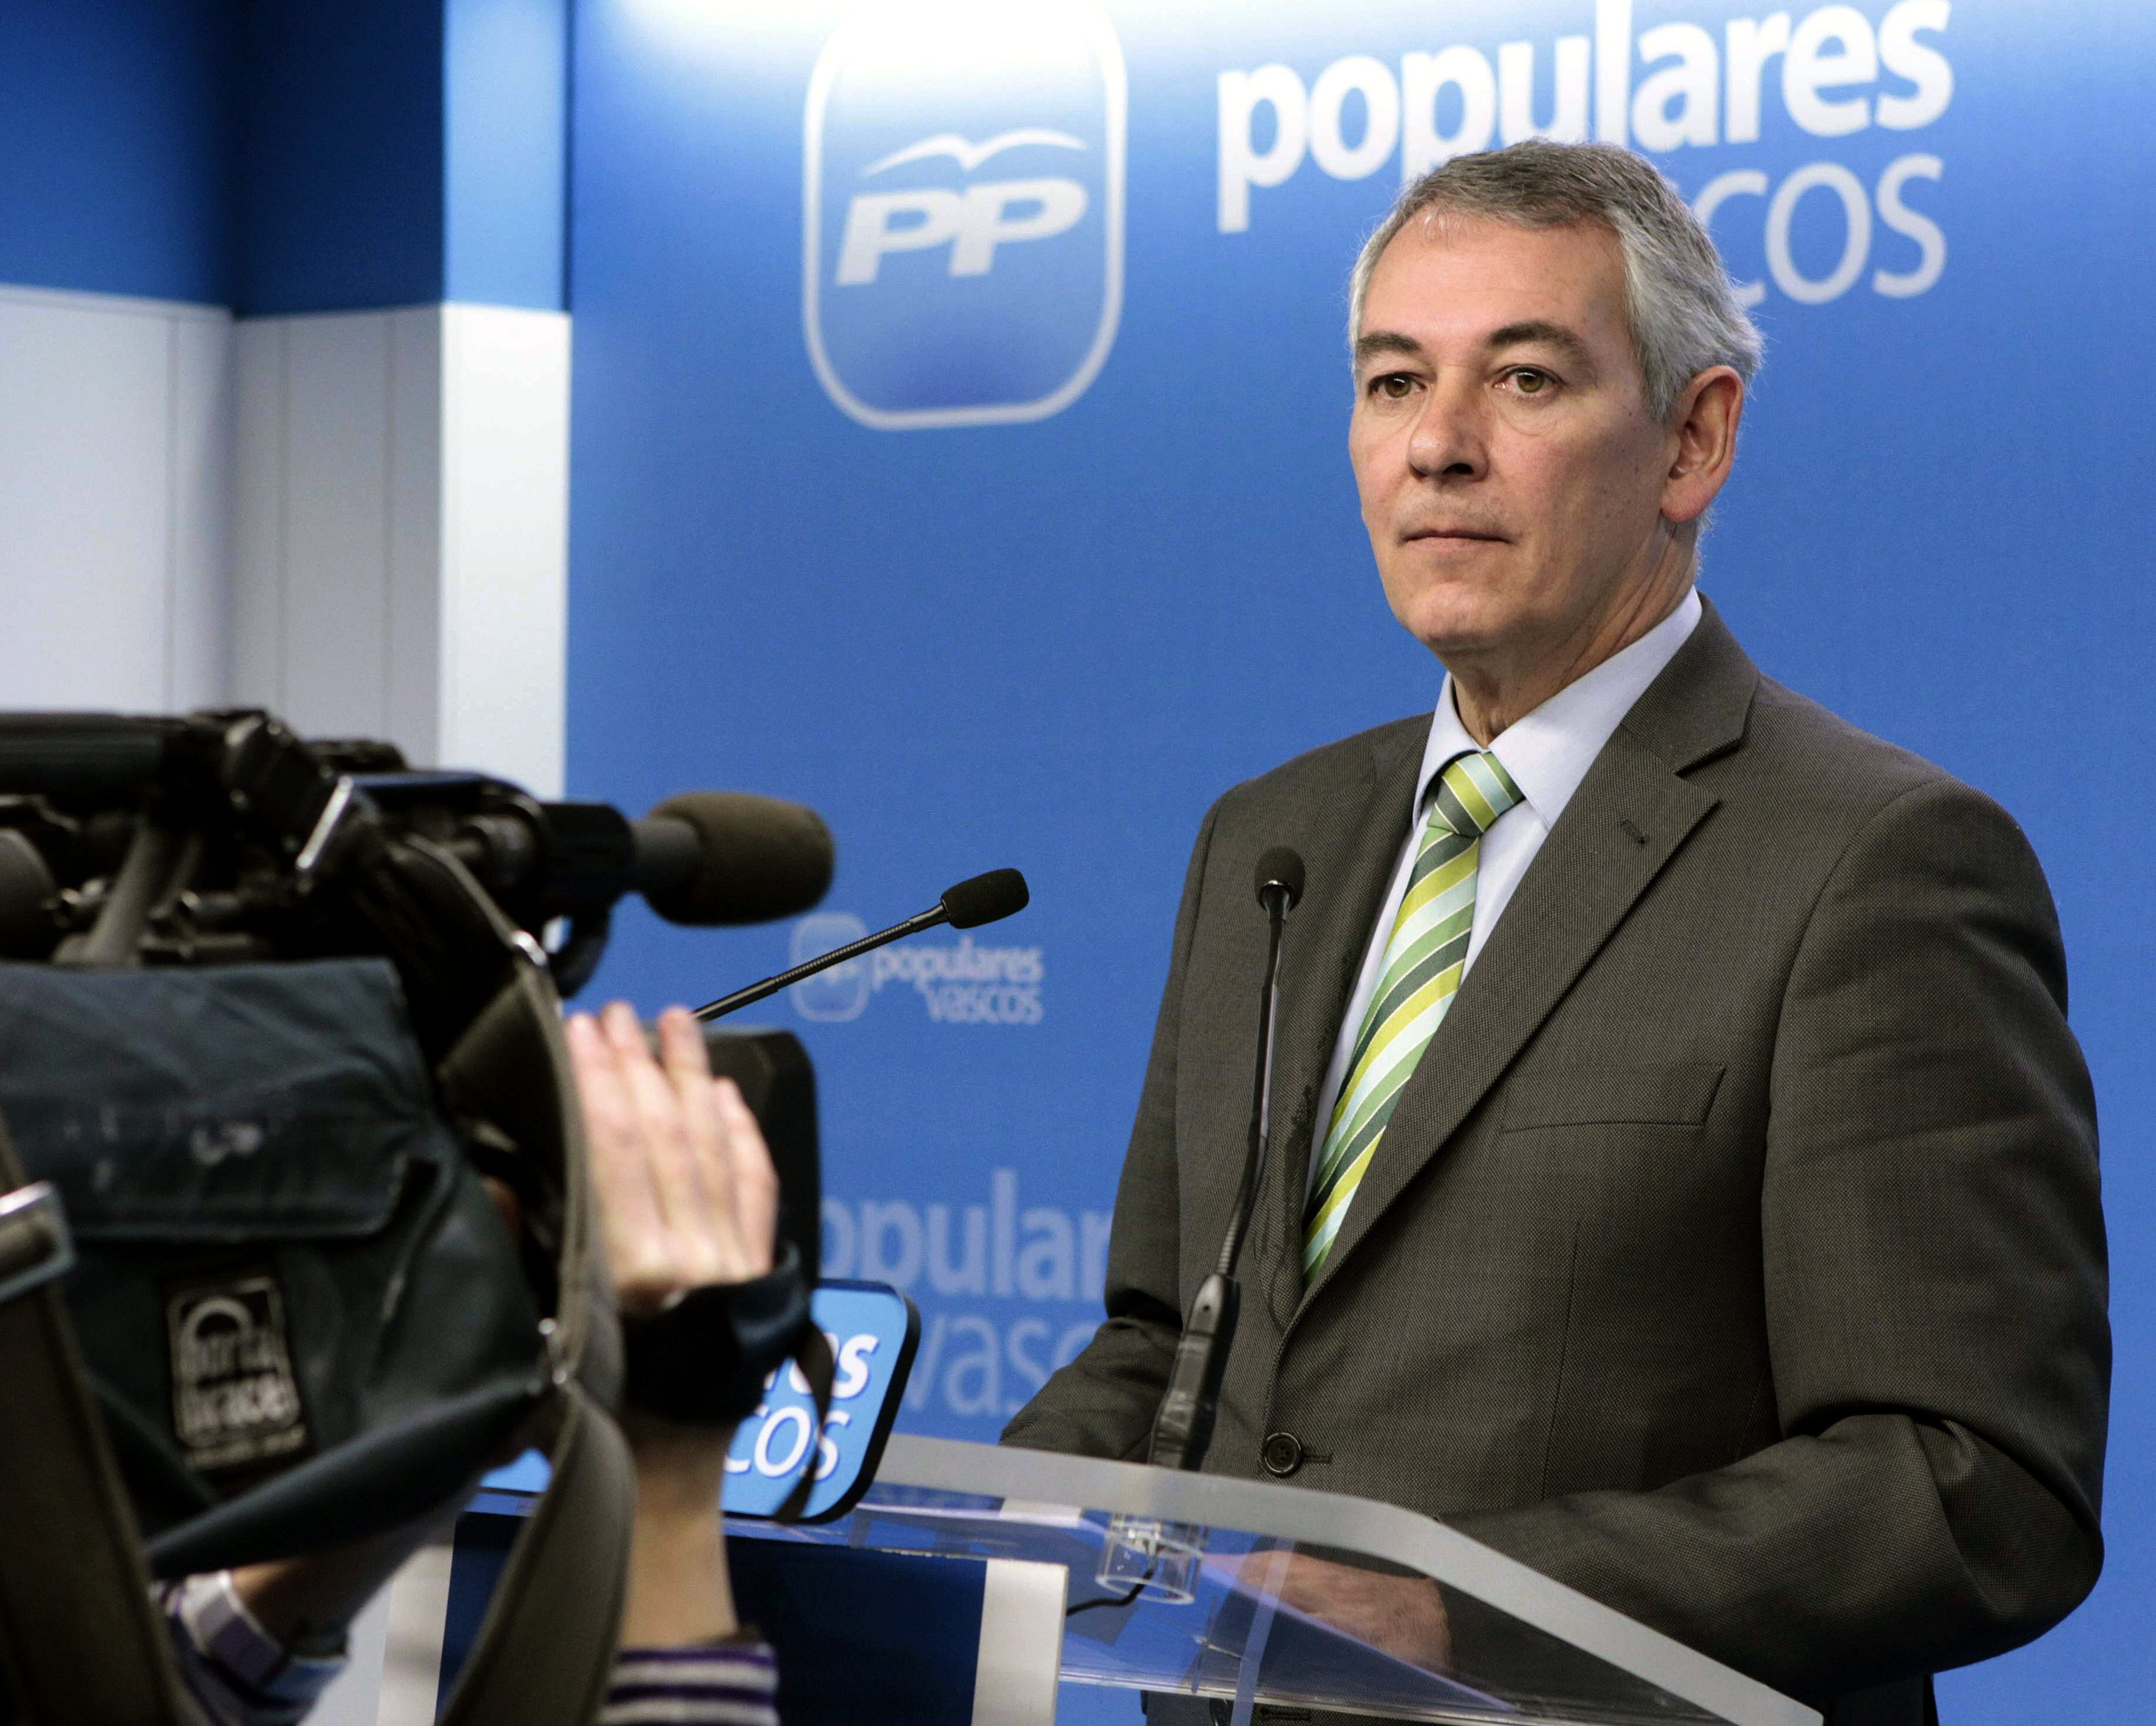 PP threats against planned new Basque autonomy statute have echoes of Catalonia